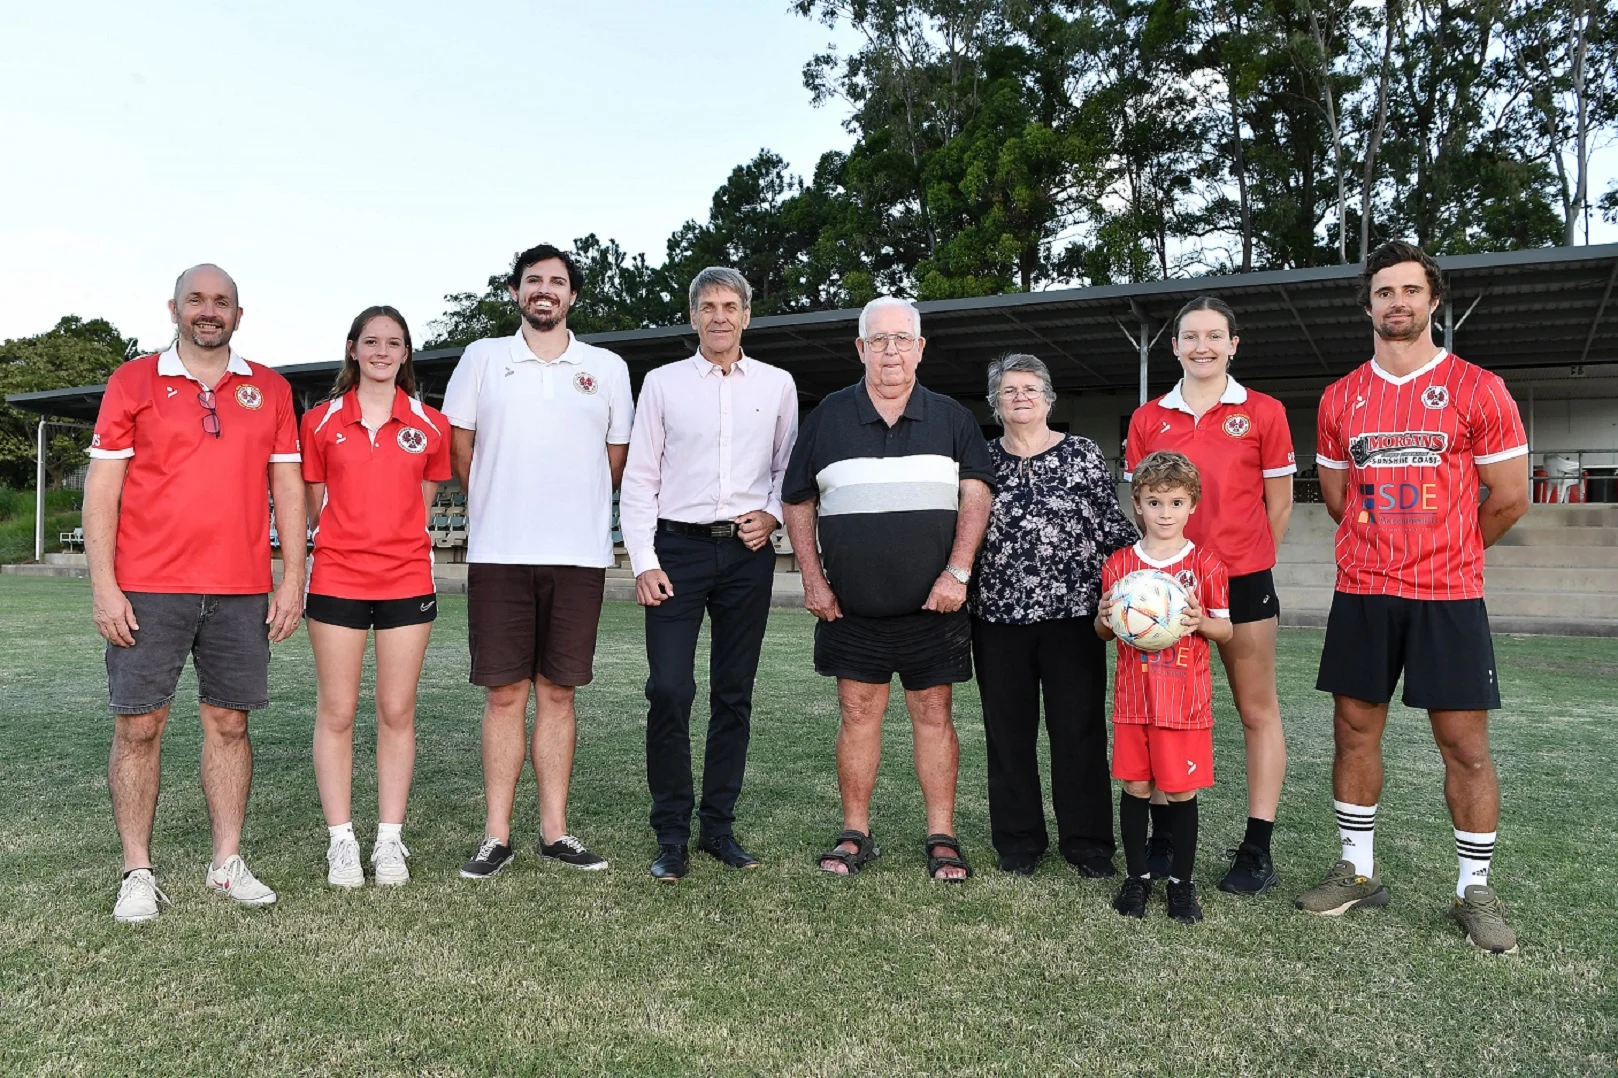 (Left to right) NYU Football Club President Jeff McColl with his daughter Lily McColl, Lachlan O'Keefe, Sunshine Coast Council Division 10 Cr David Law, Peter and Jenny Harth, their great-grandson Ari Harth (at front), Sophie Day, and Peter and Jenny's grandson Jono Harth.